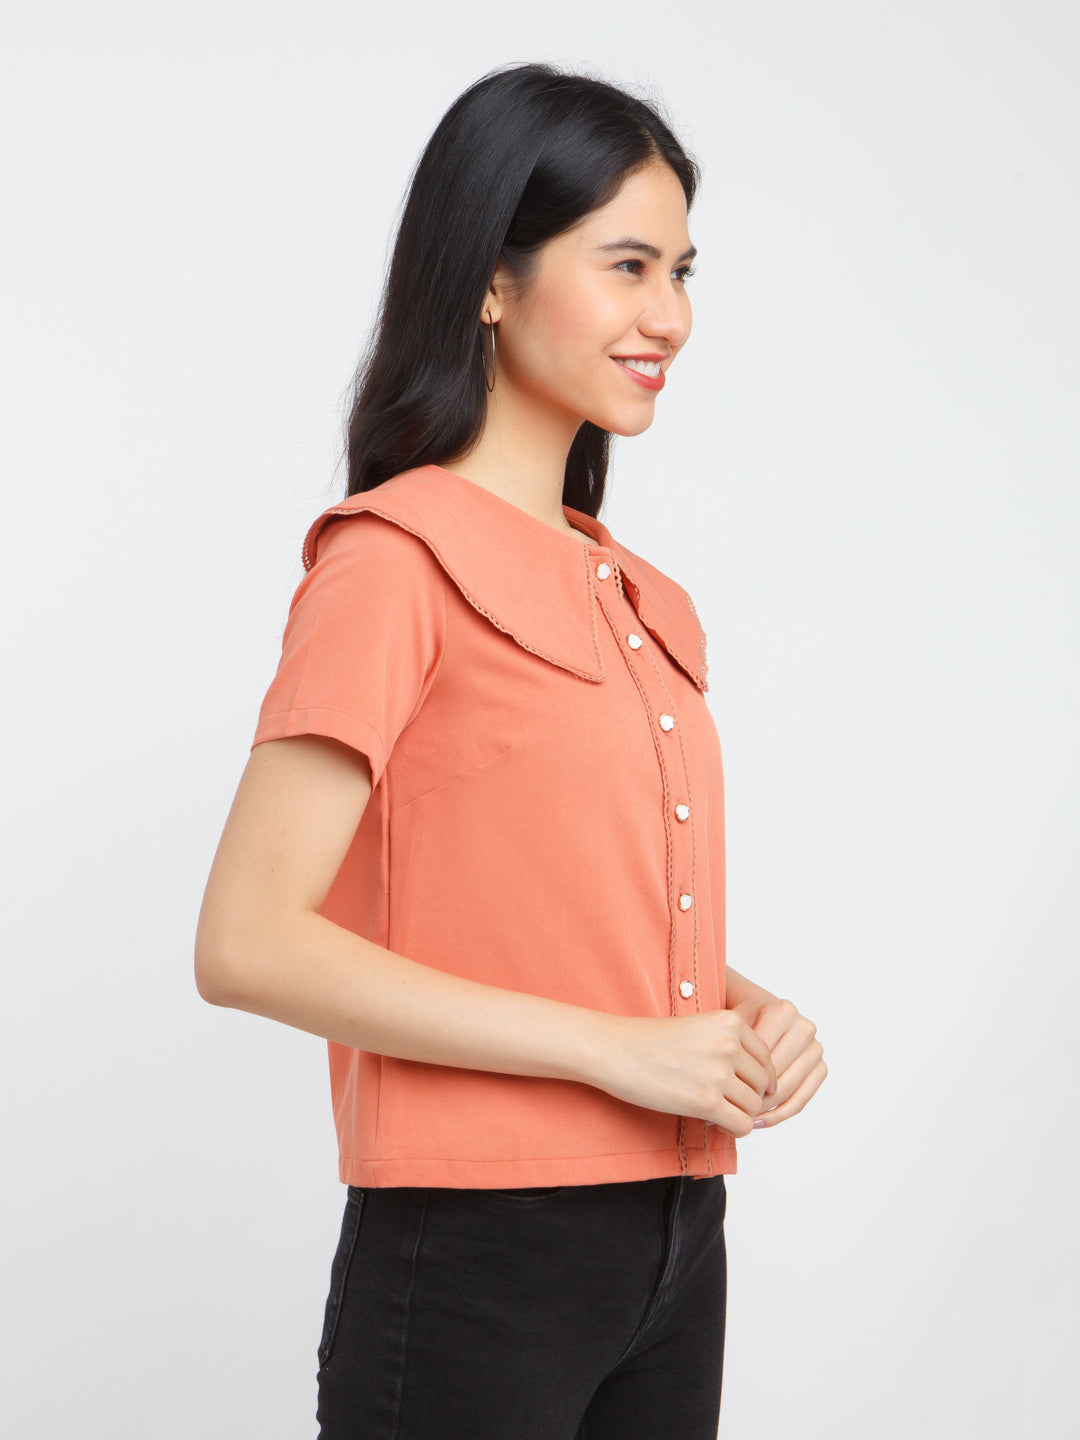 Orange Solid Lace Insert Top For Women